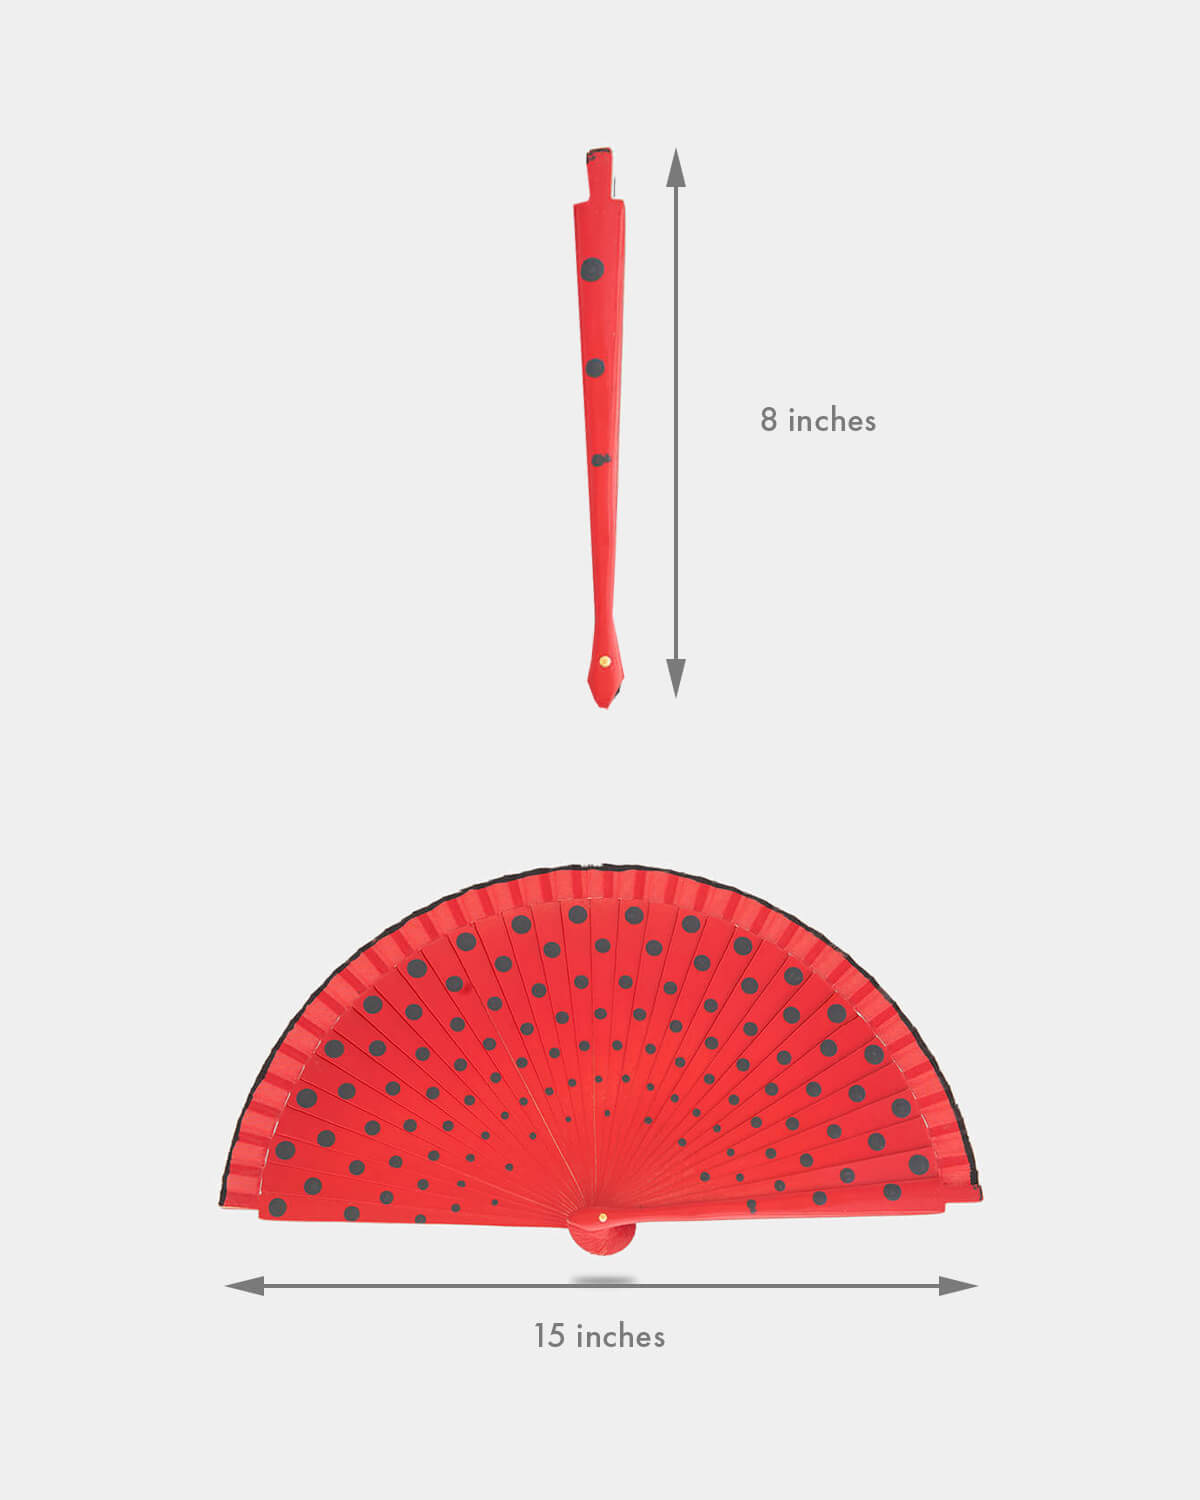 Flamenco wooden hand fan red with polka dots Lunares in black 8 inches (21 cm)